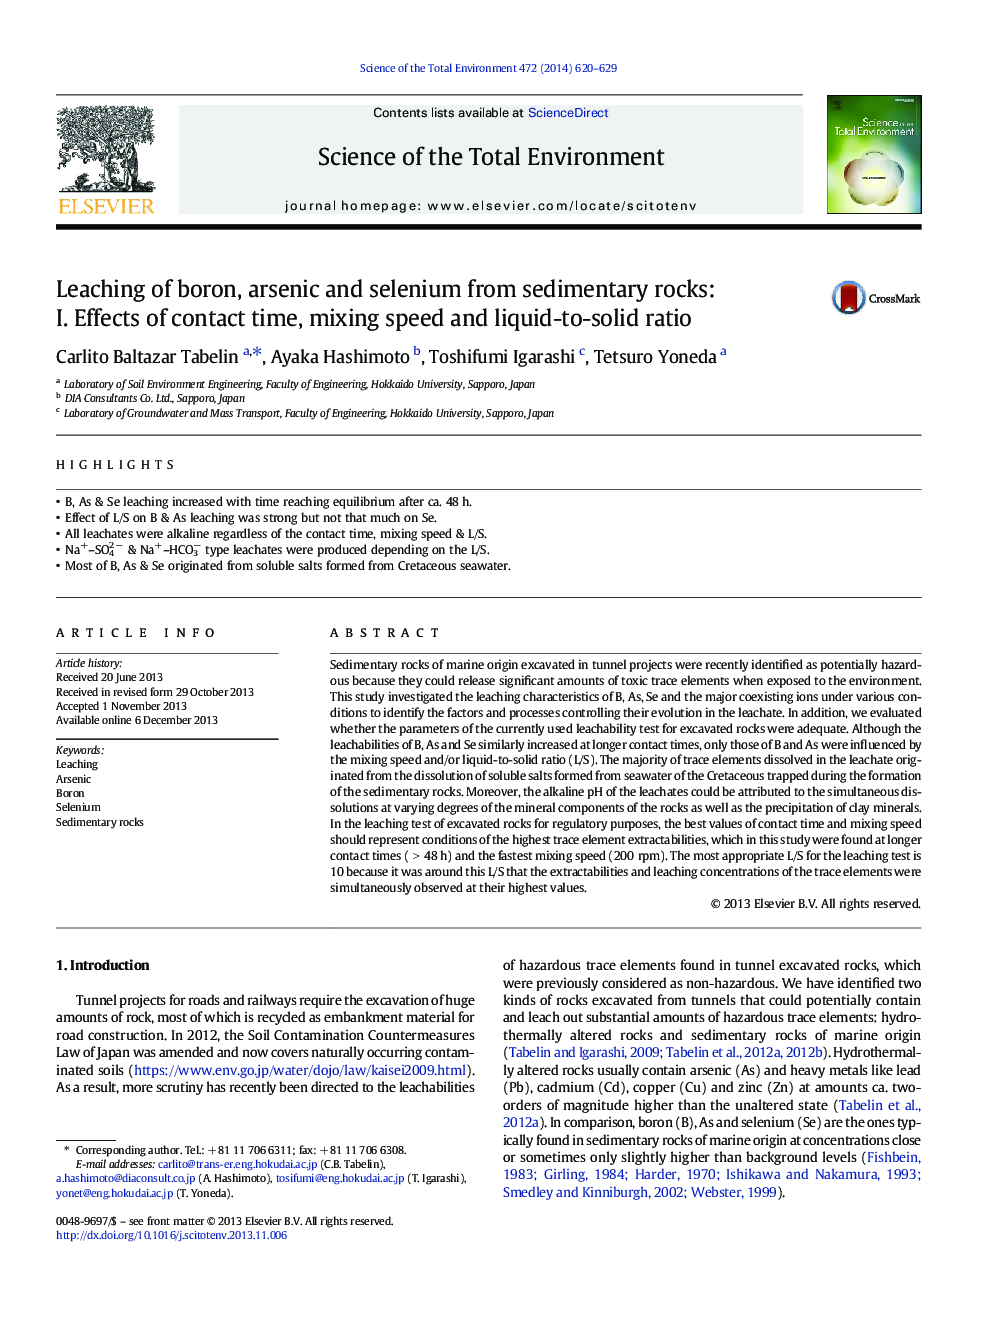 Leaching of boron, arsenic and selenium from sedimentary rocks: I. Effects of contact time, mixing speed and liquid-to-solid ratio